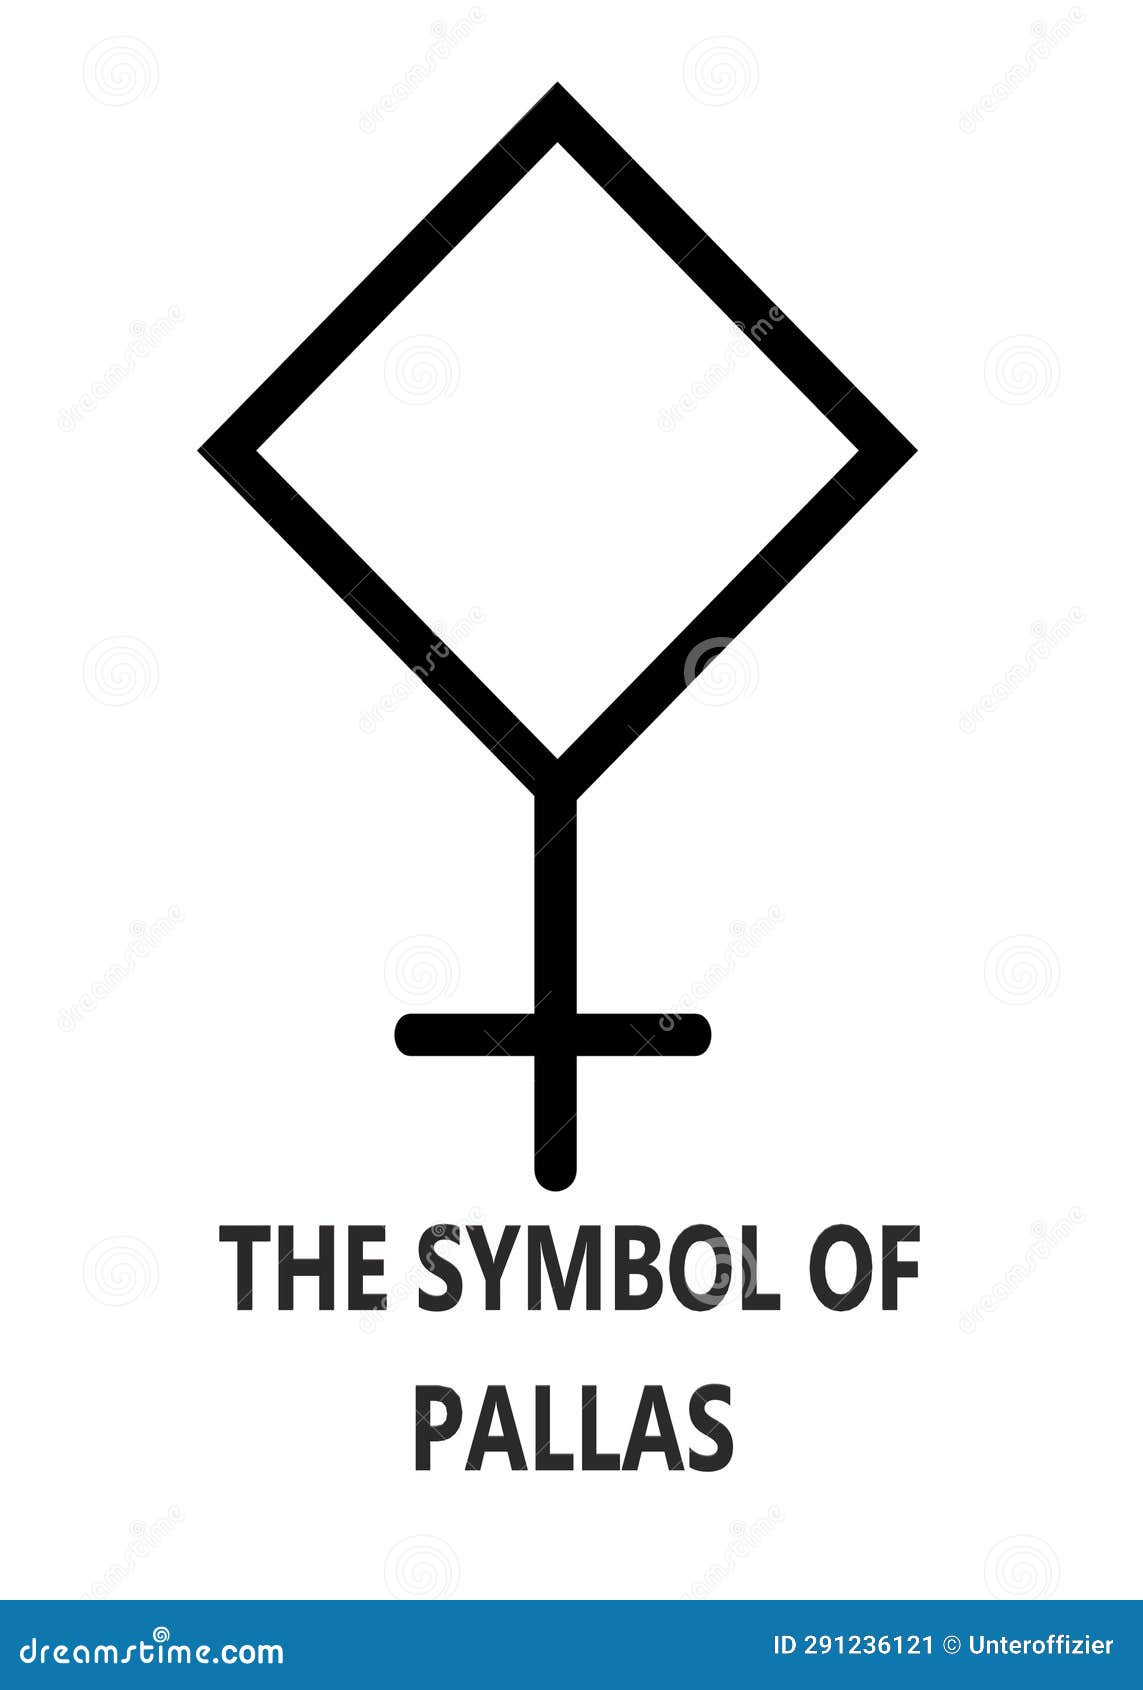 The Symbol of Pallas with Description Words White Backdrop Stock ...